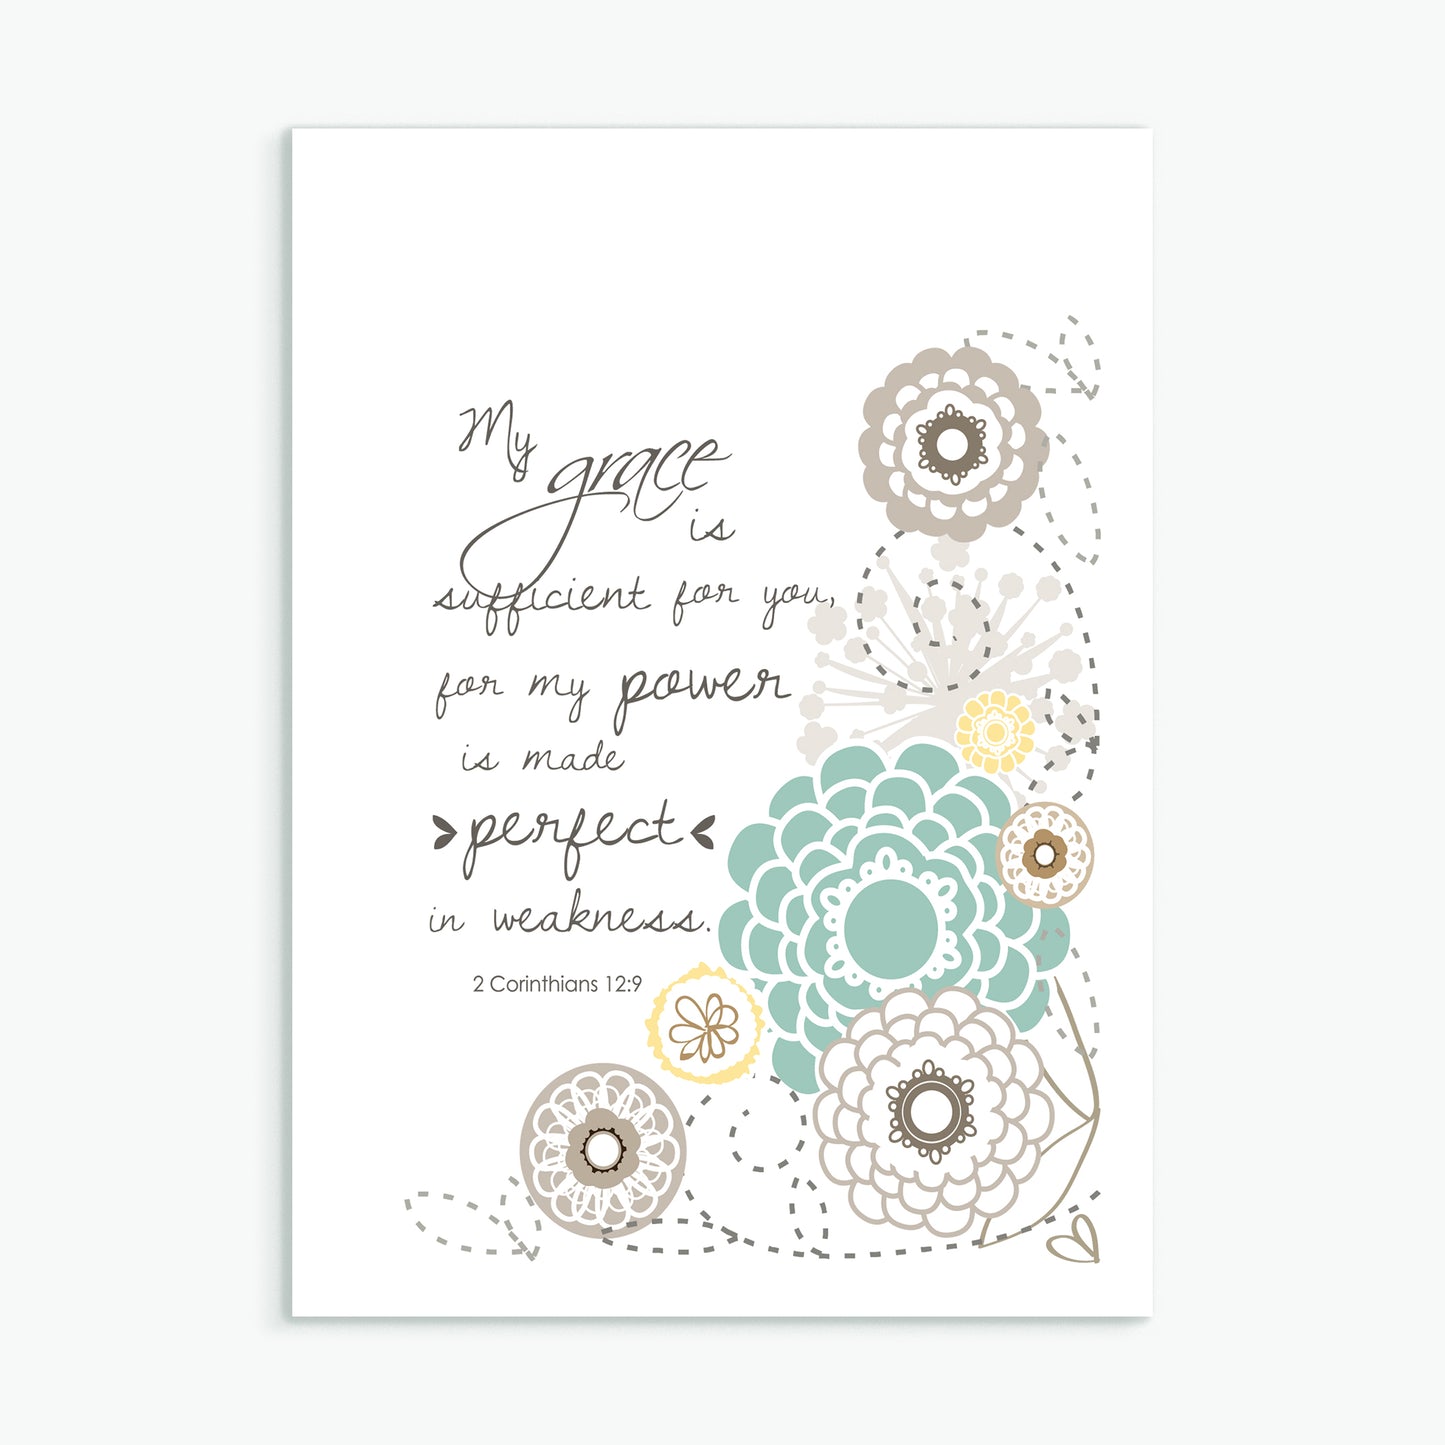 'Grace' by Emily Burger - Greeting Card